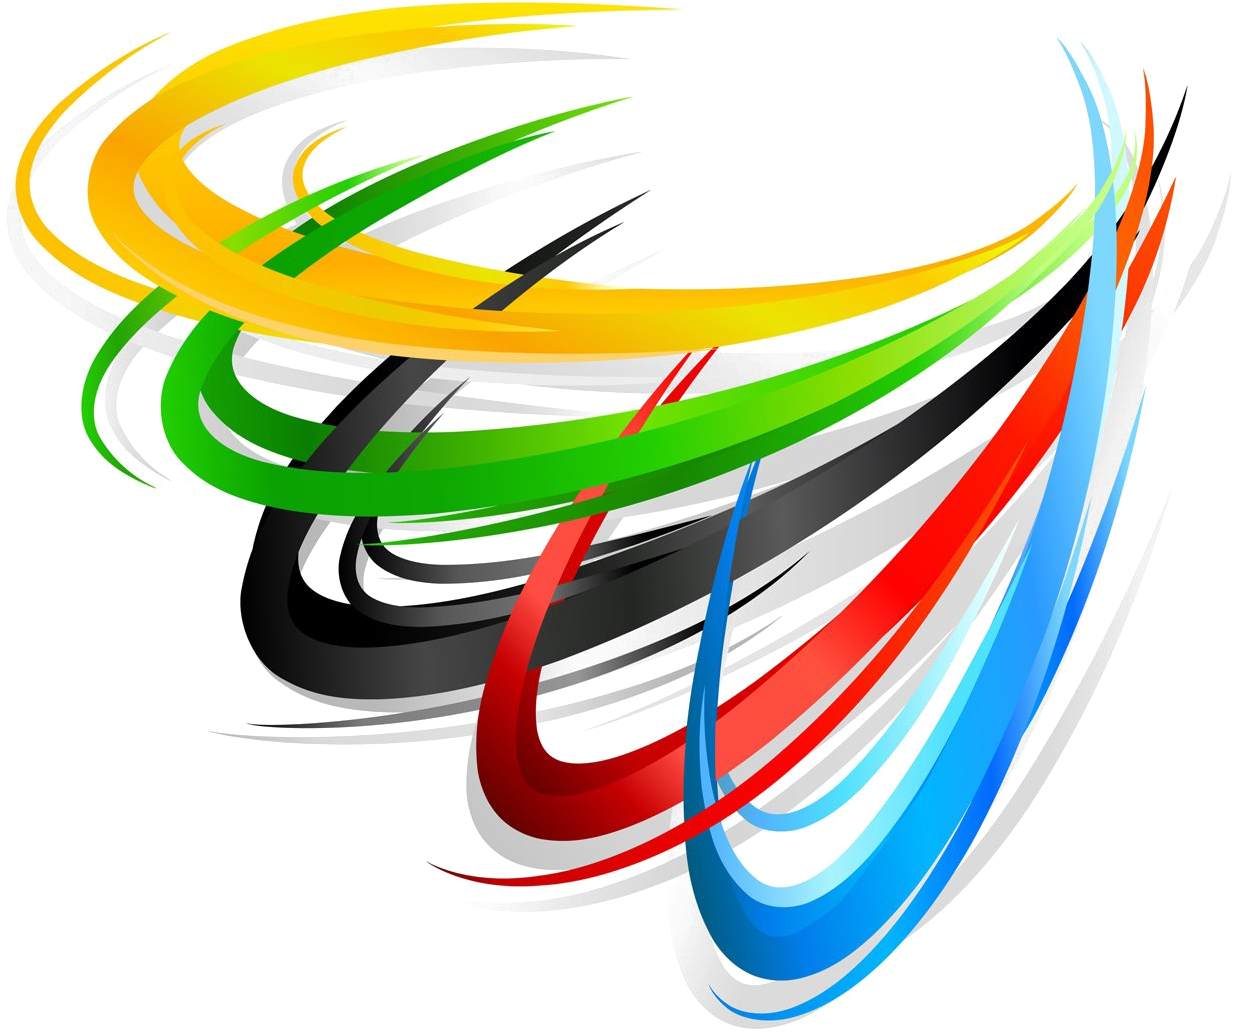 Abstract Olympic Rings Artwork PNG image